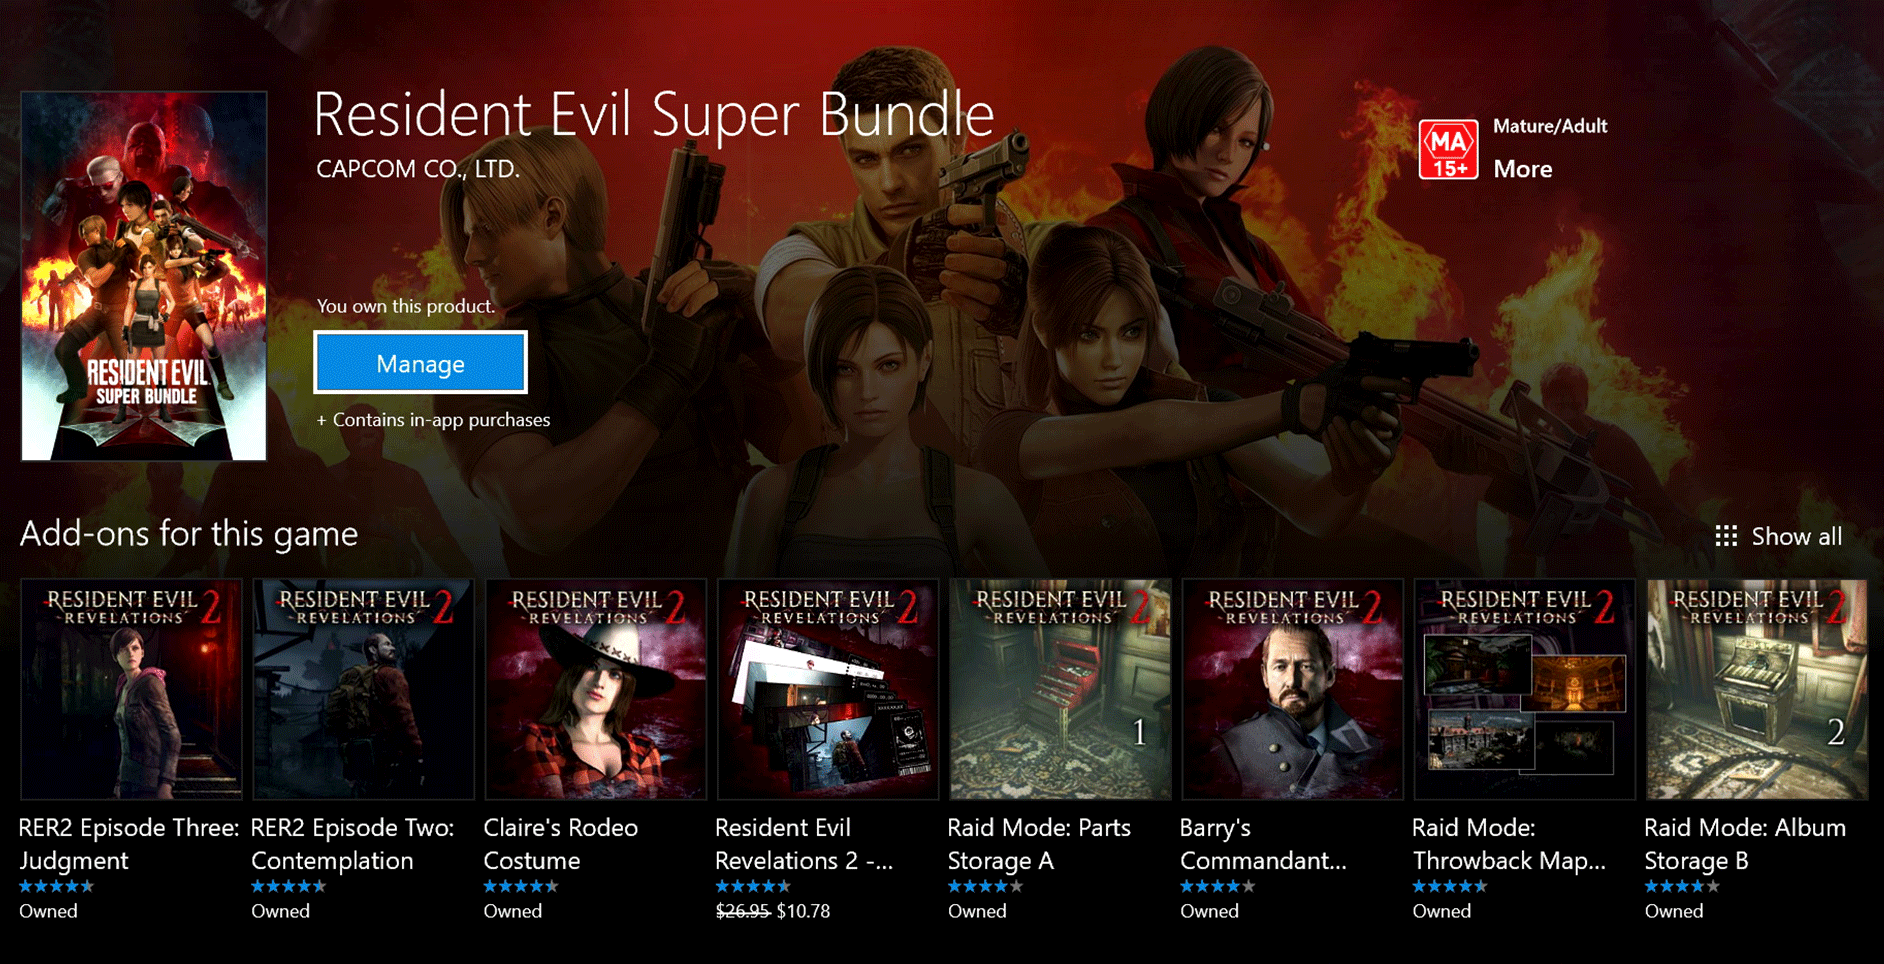 Get nearly the entire Resident Evil series for $30 with this